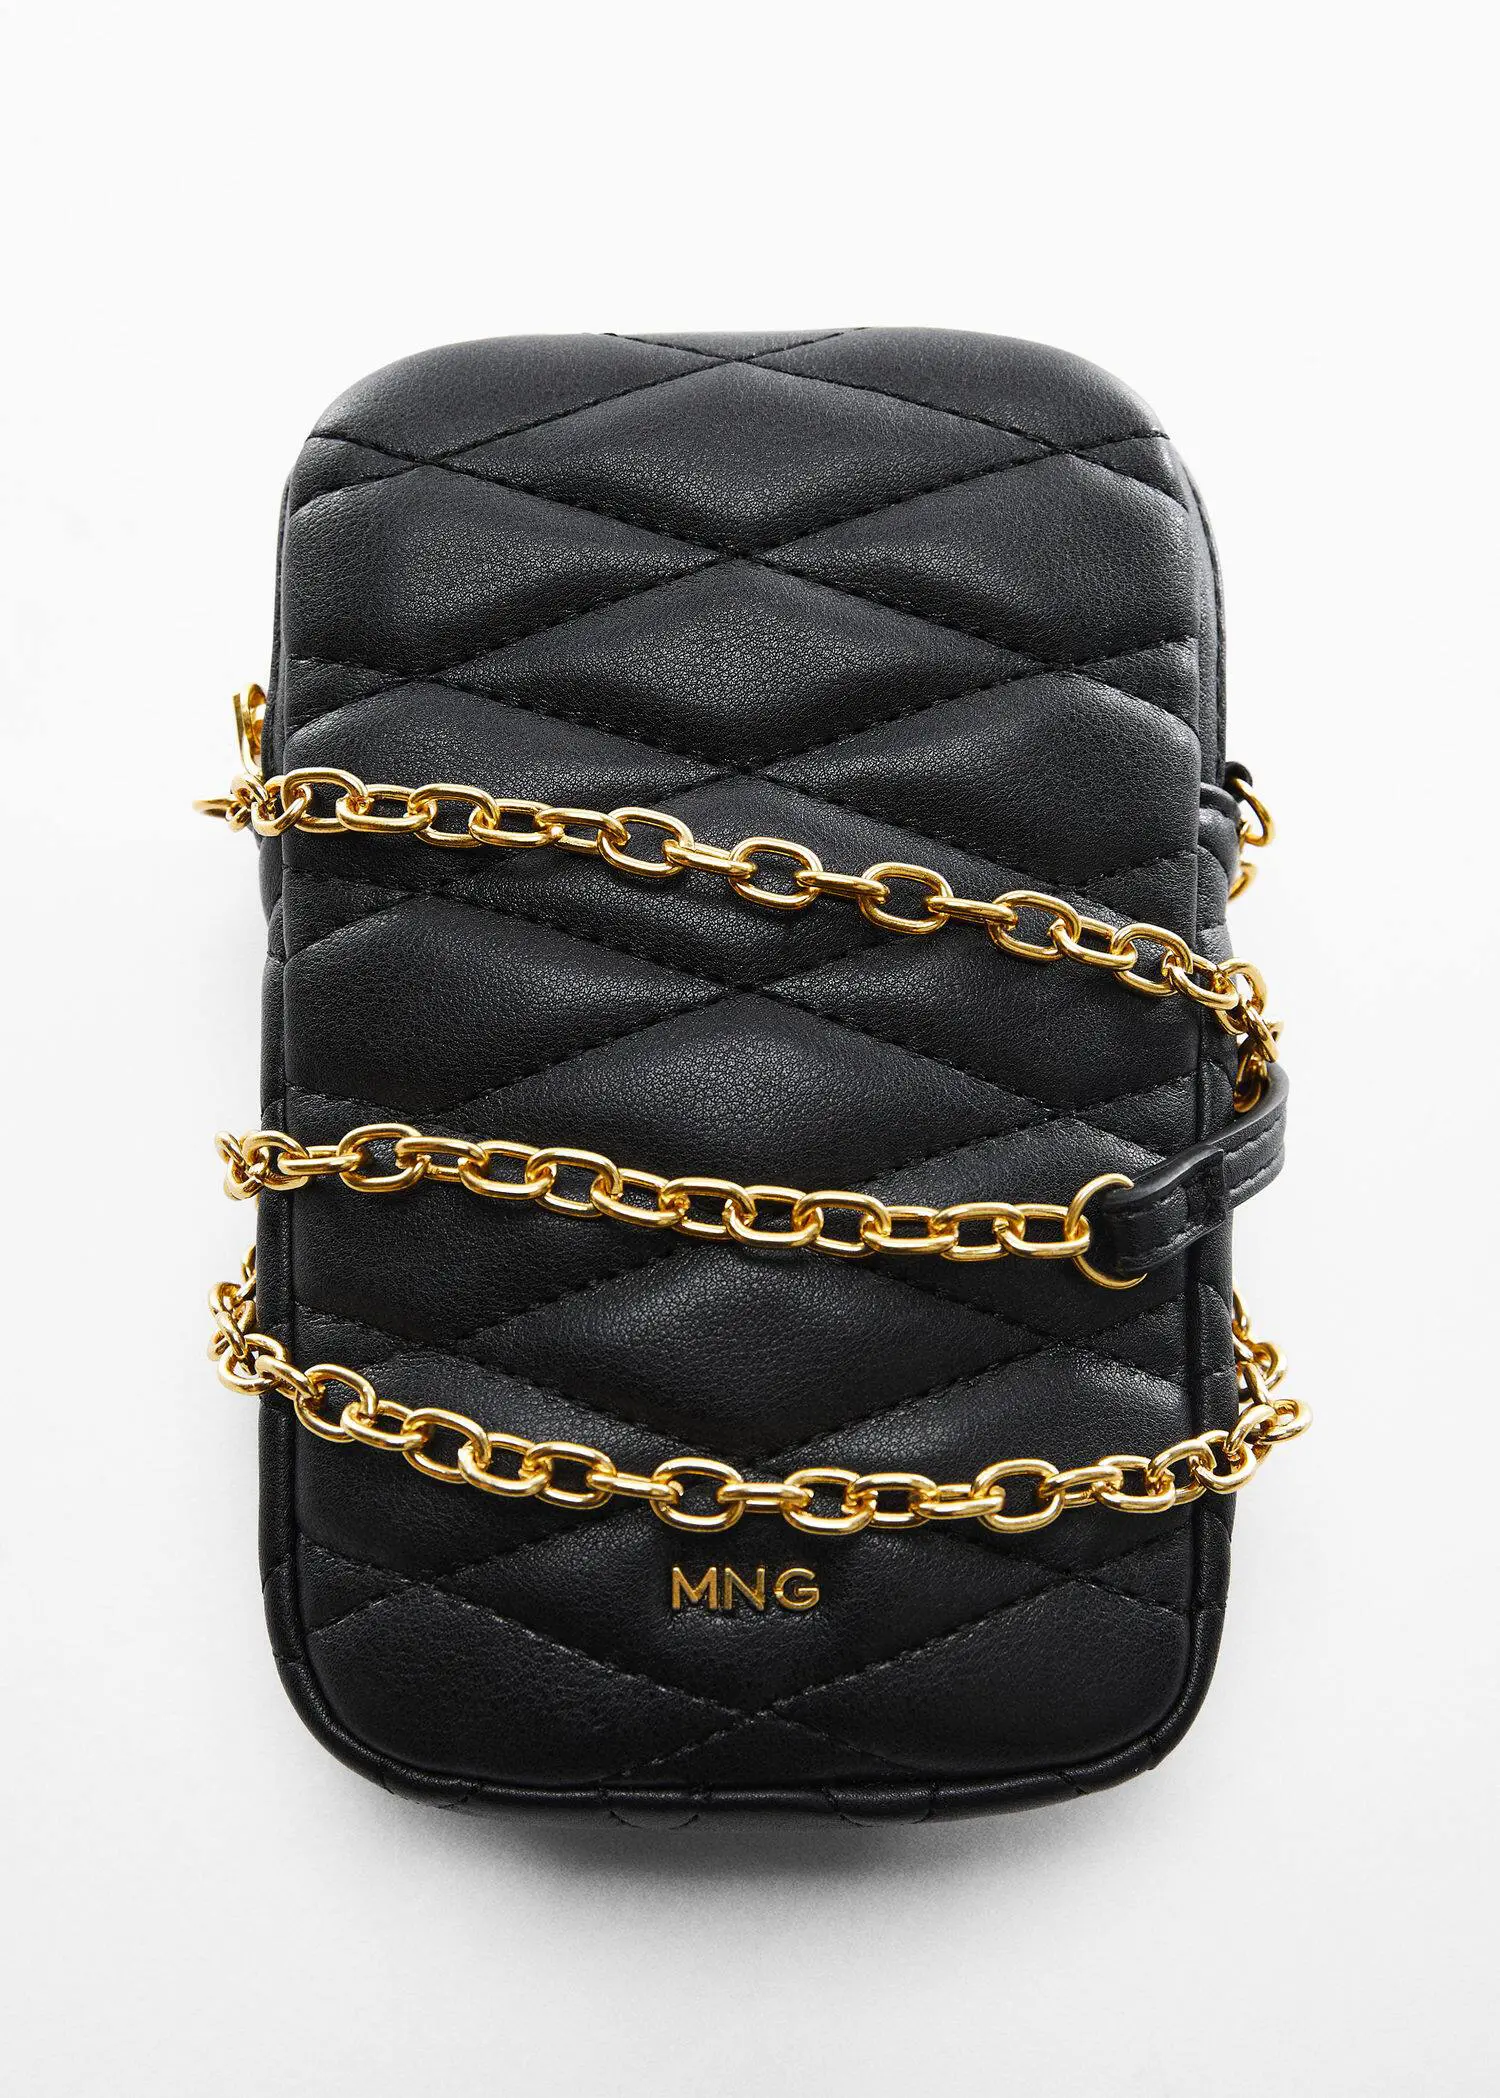 Mango Padded mobile phone case. a black purse with gold chains around it. 